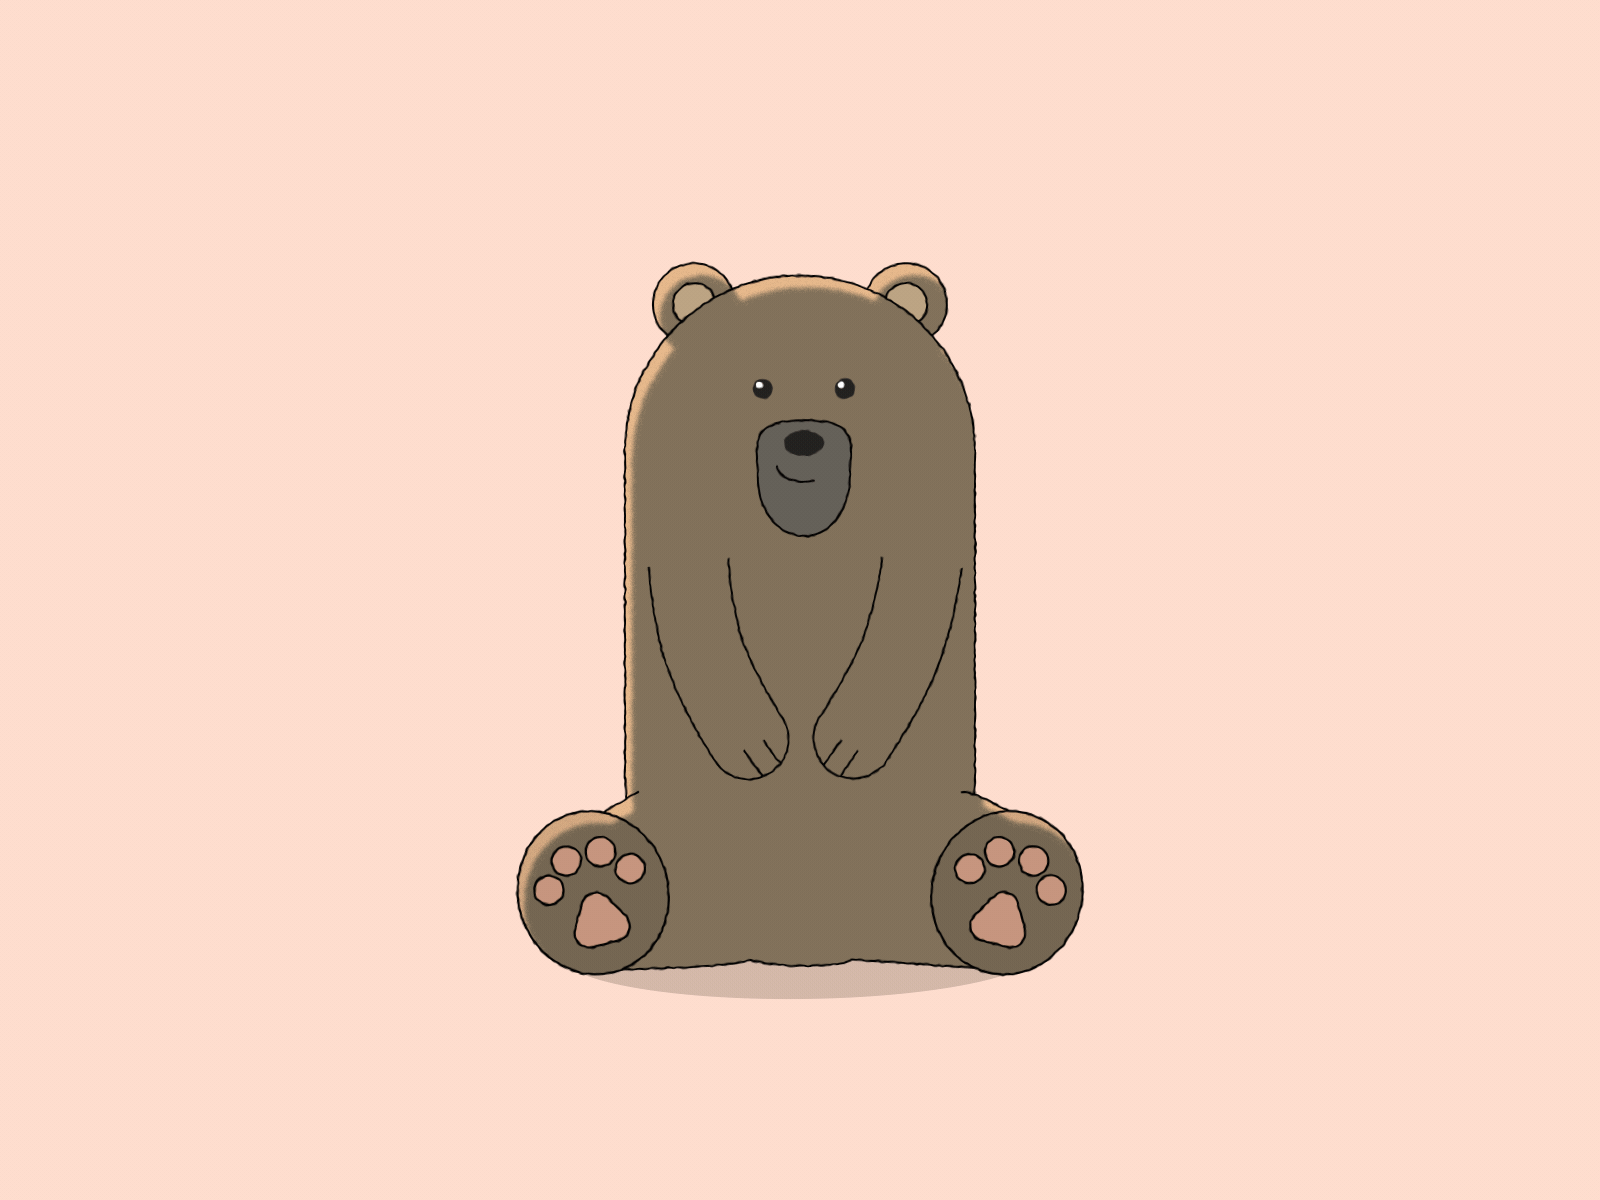 Waving Bear 2d 2danimation aftereffects animal animation animation 2d bear character characteranimation characterdesign cute funny